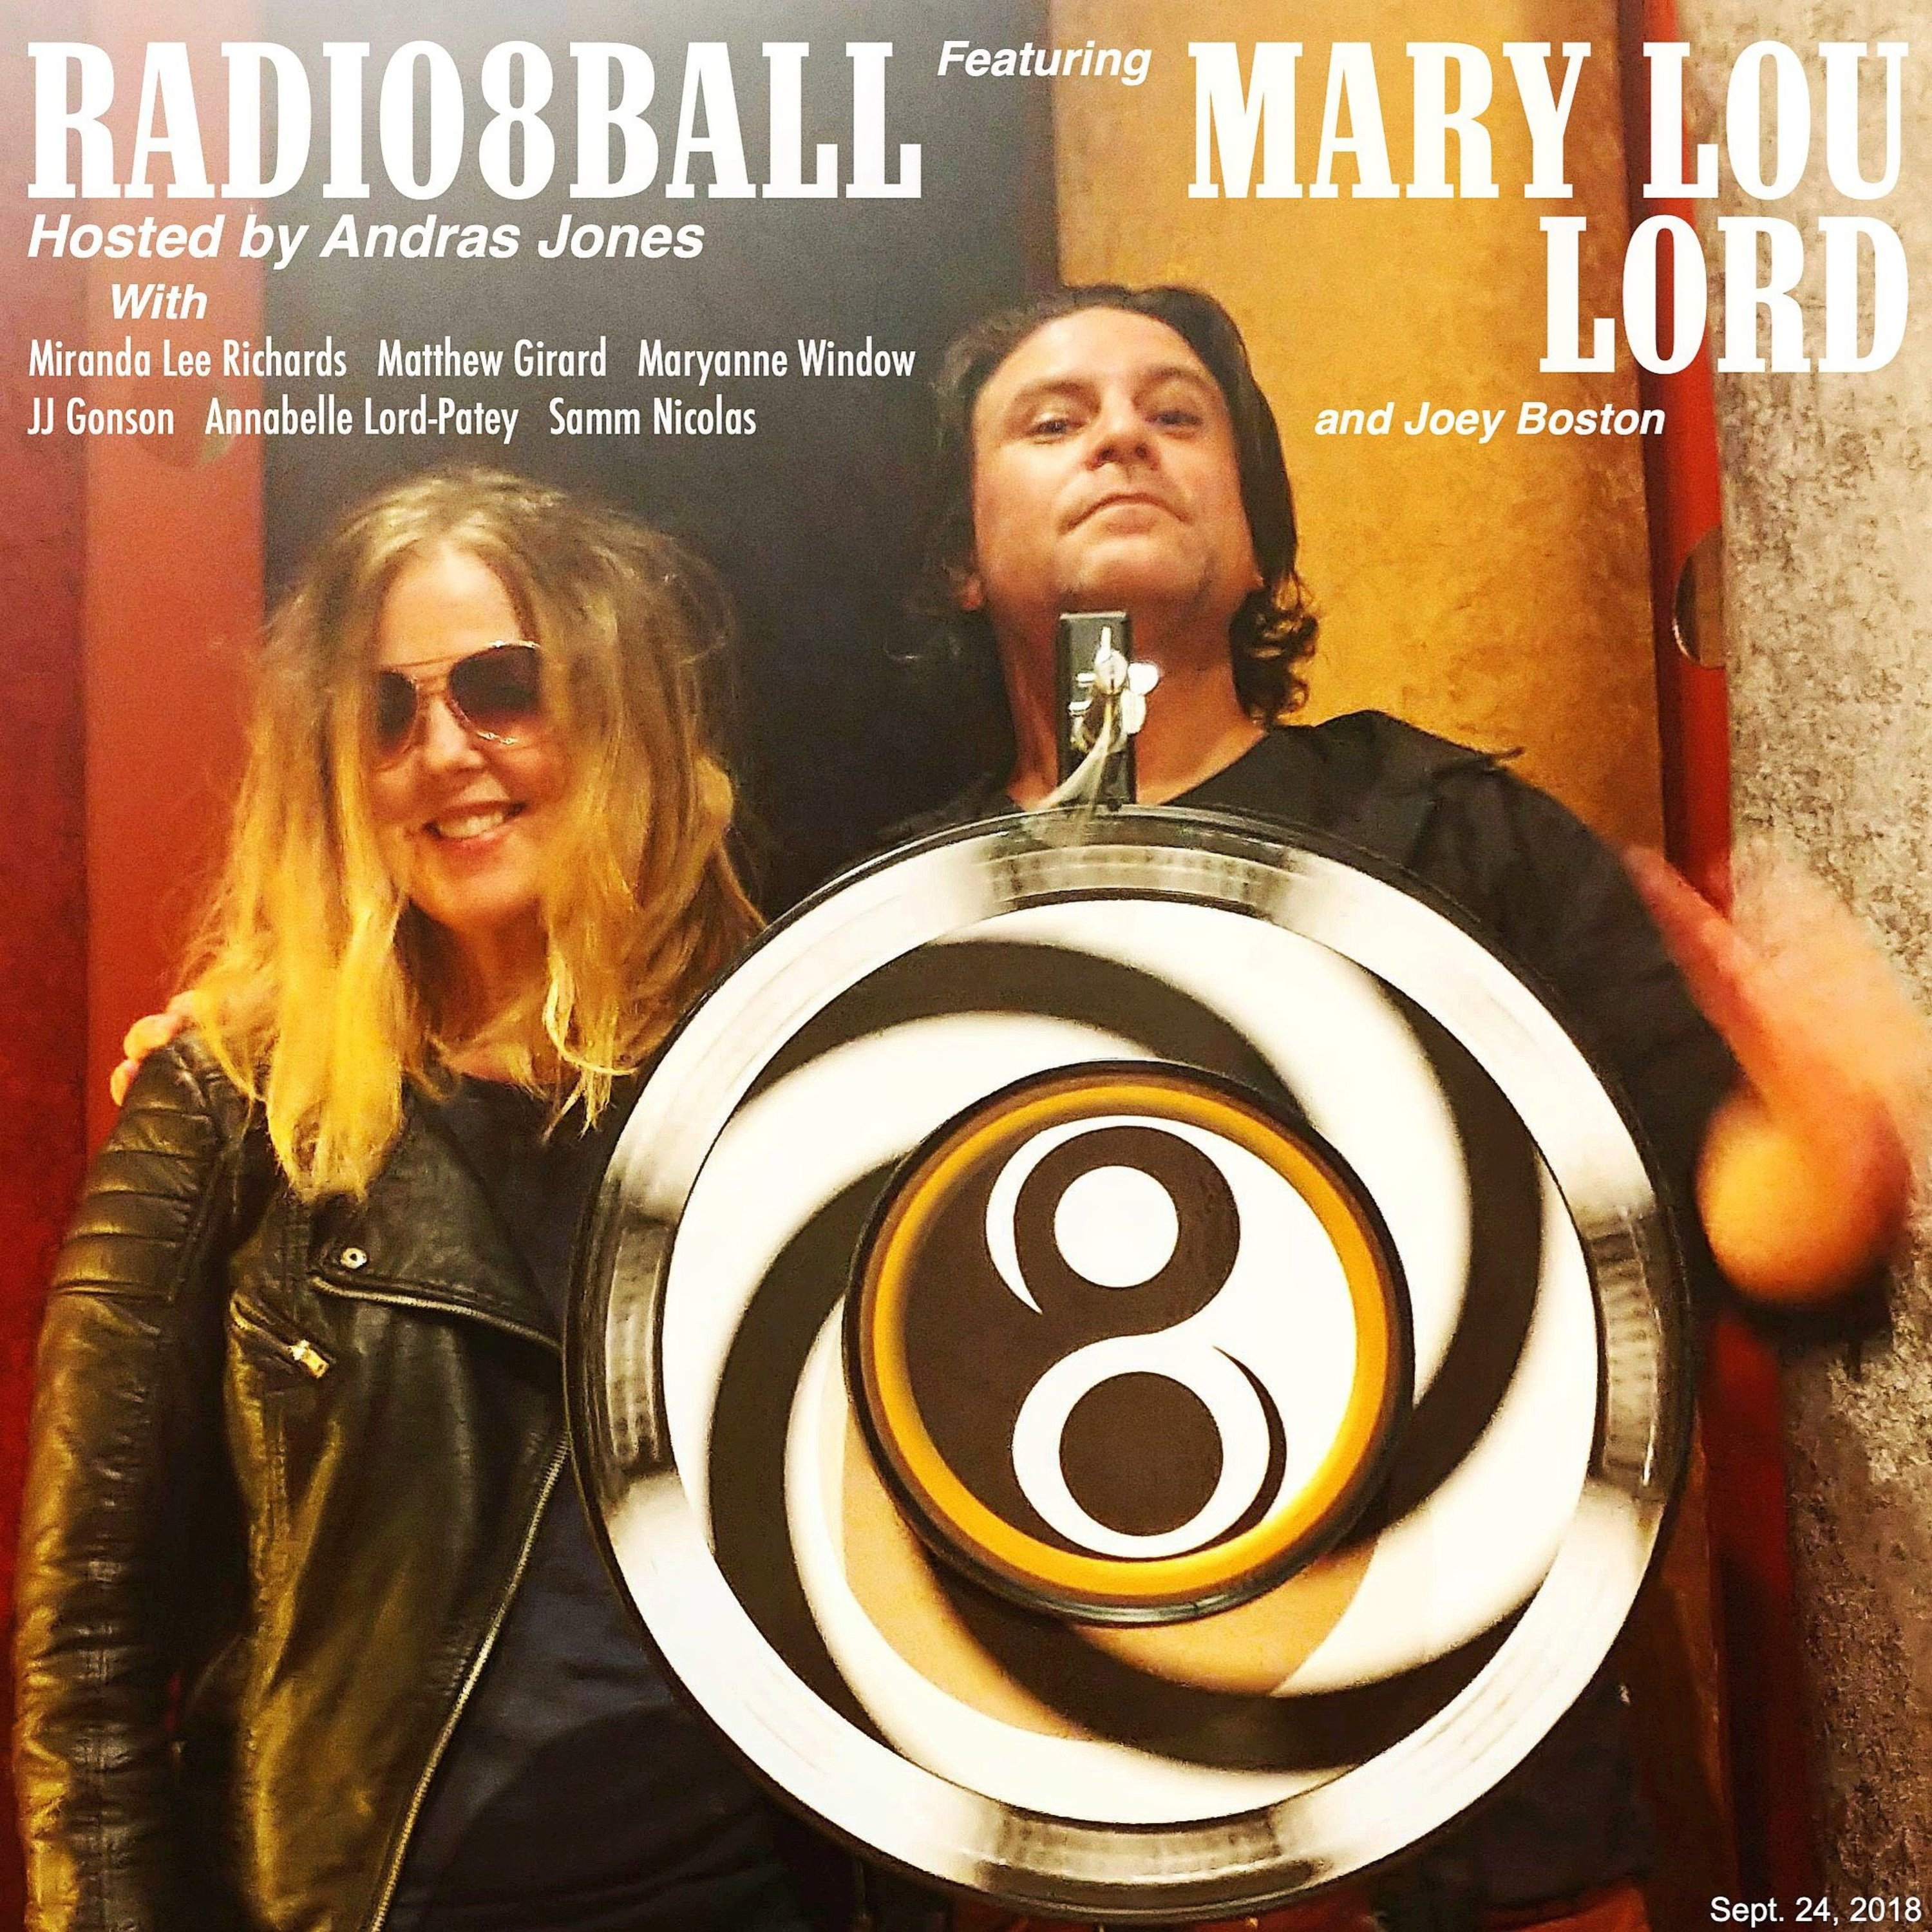 376: Mary Lou Lord & Mary Lou Lord (September 24, 2018)